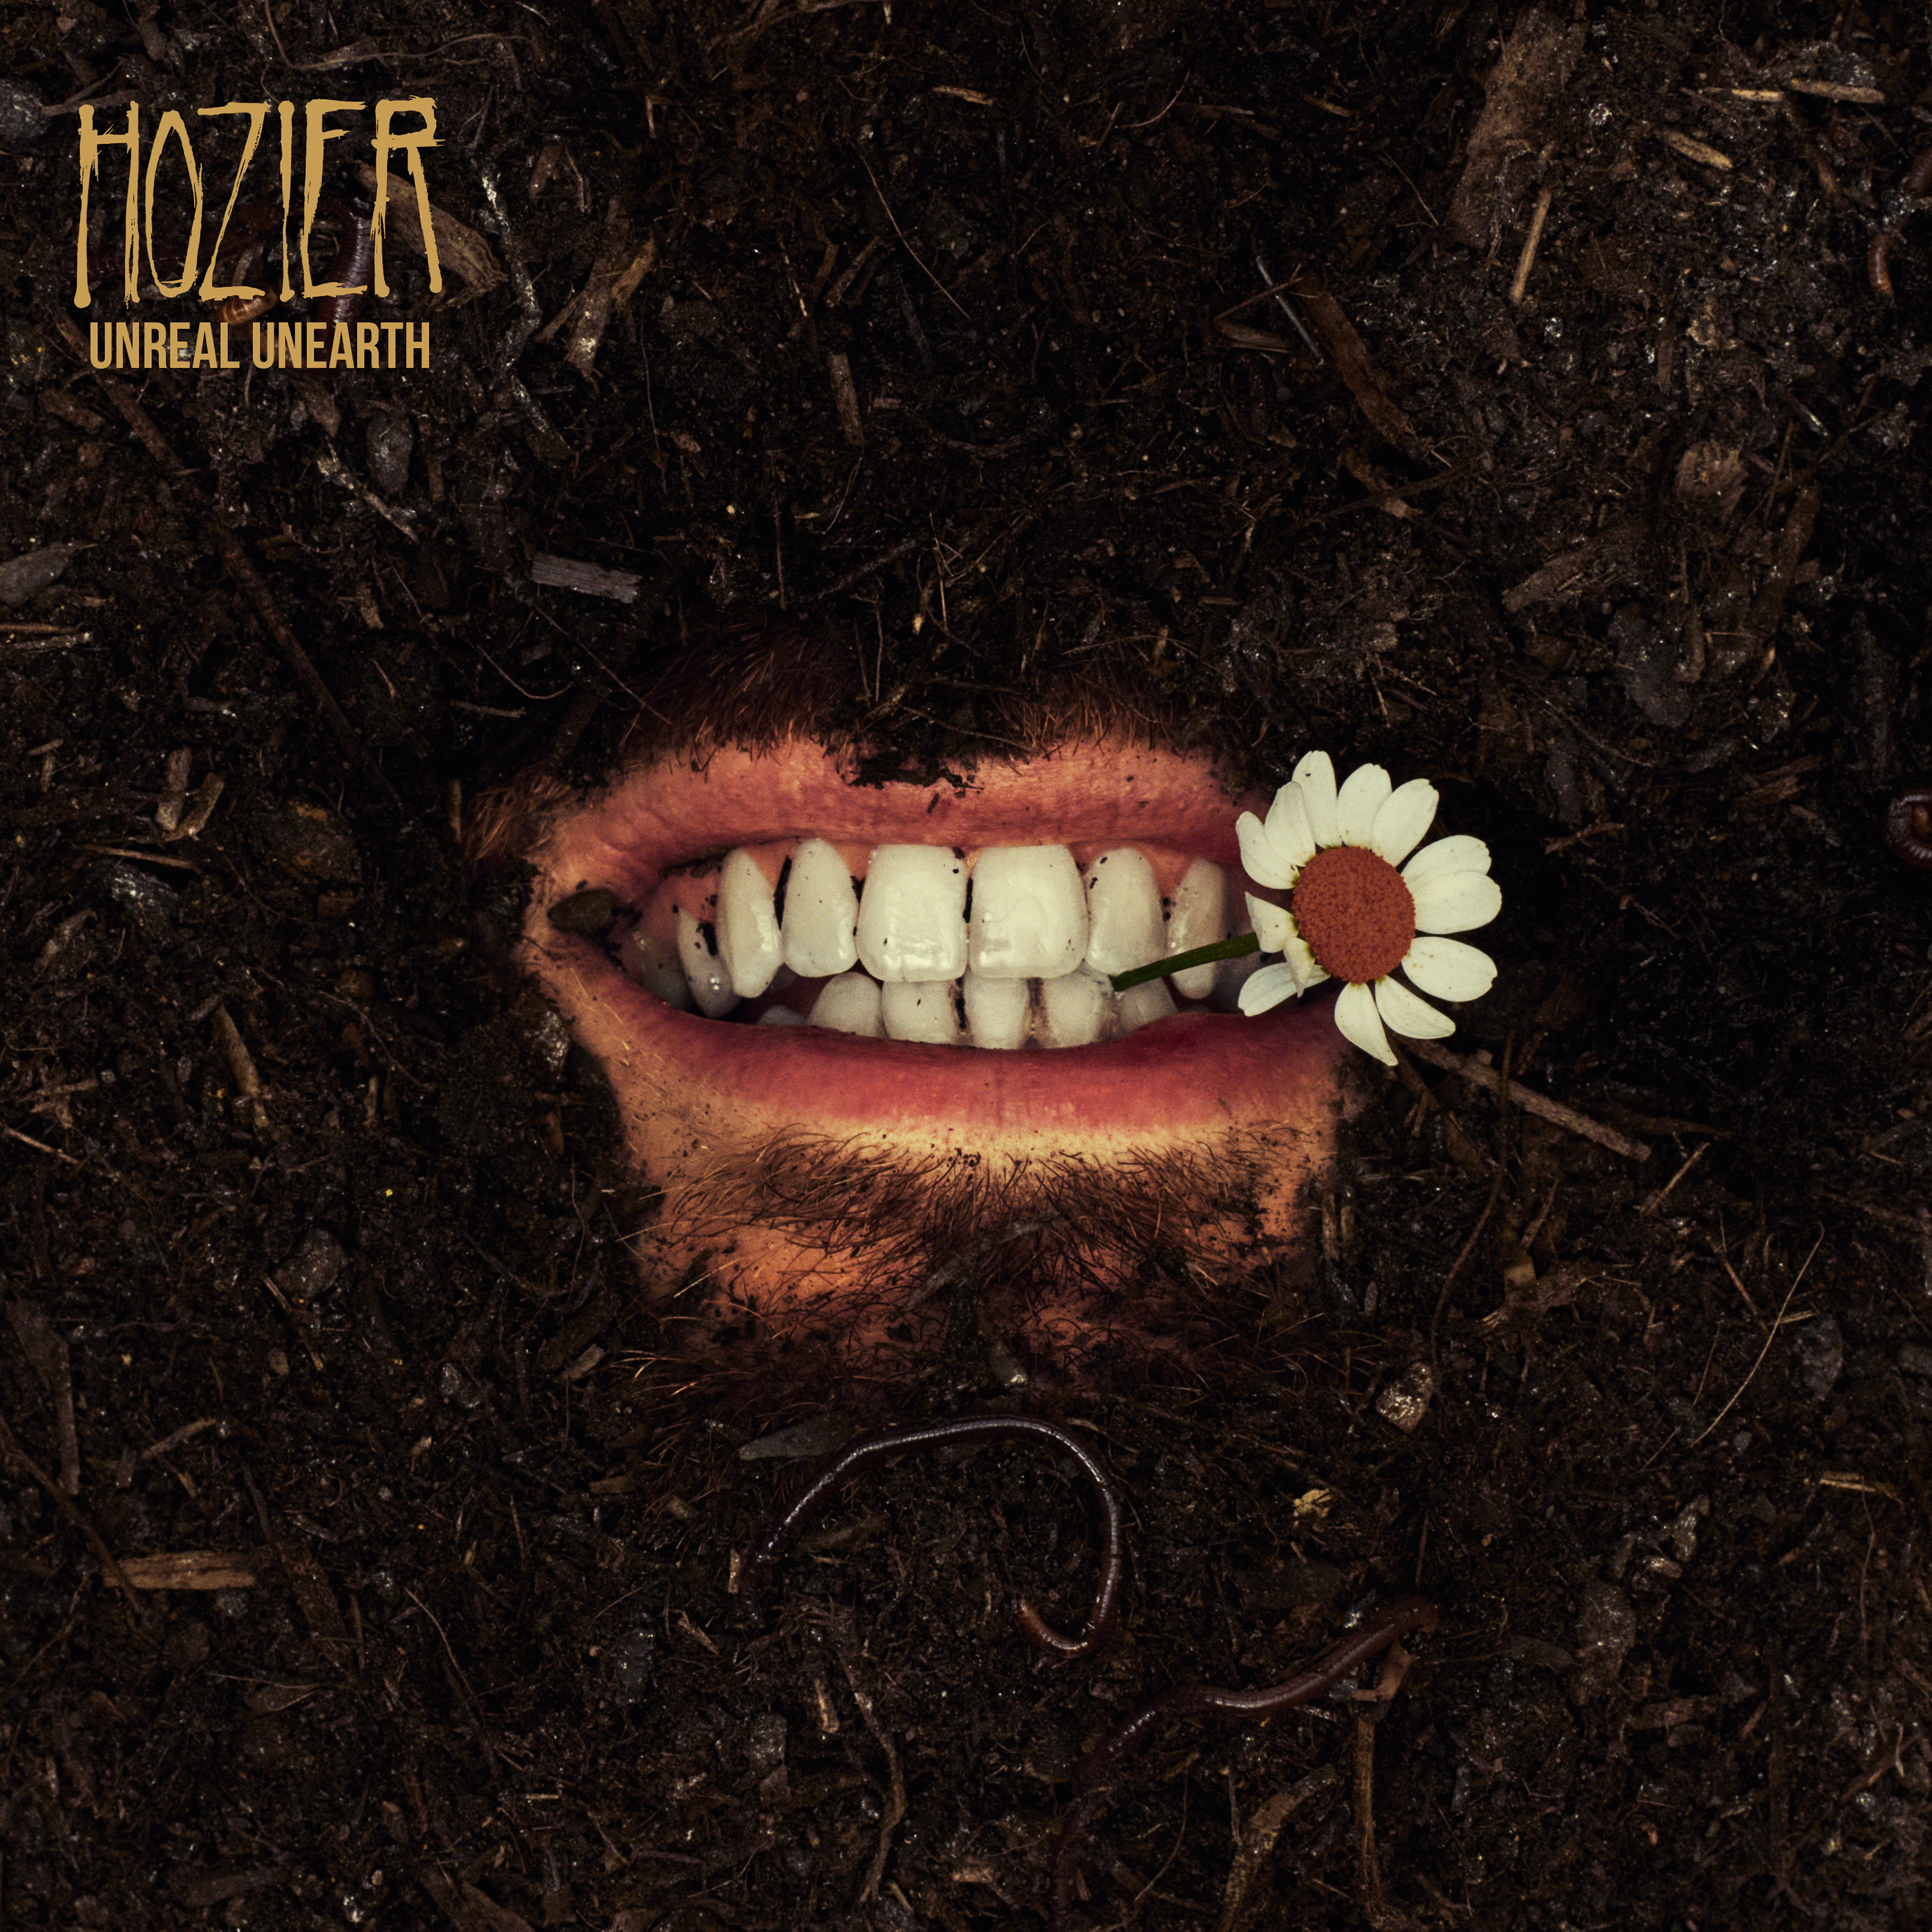 Hozier — First Time cover artwork